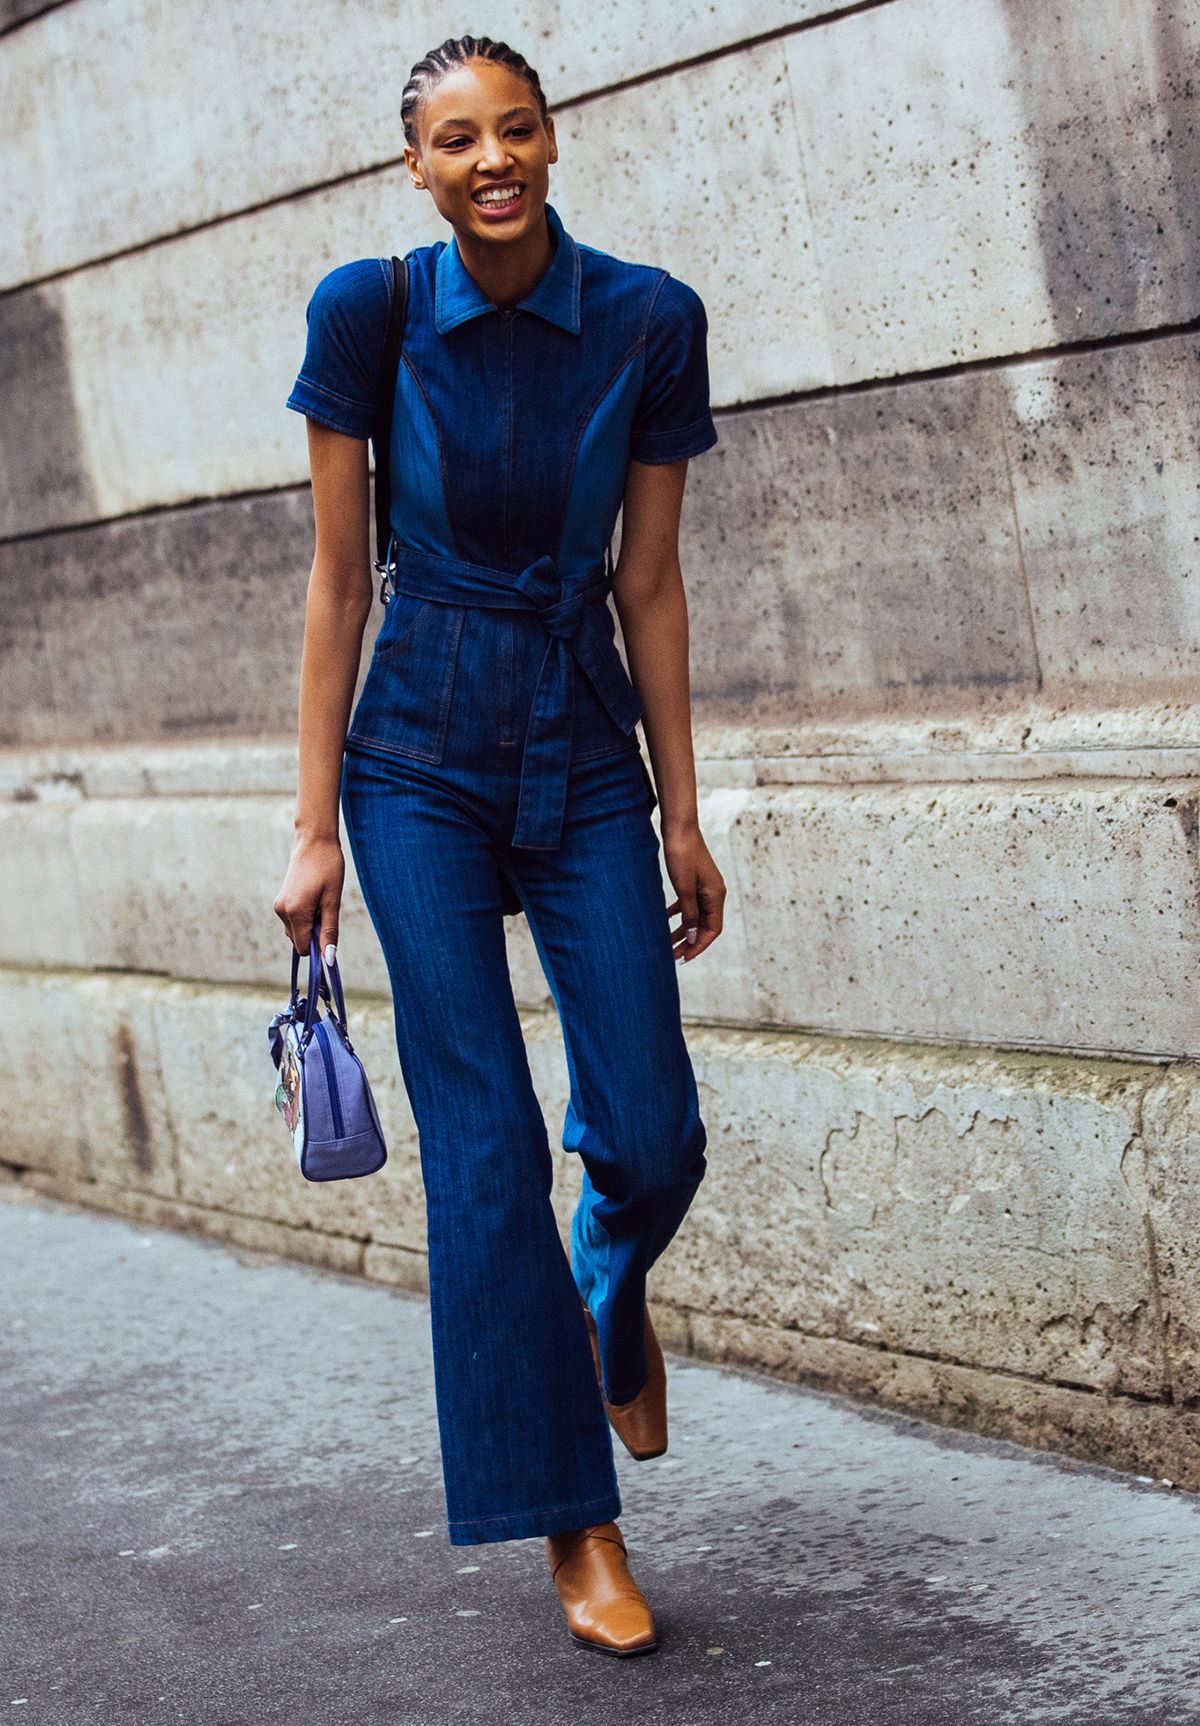 Patchwork Denim Is the Trend Huge Designers Are Revisiting | Who What Wear